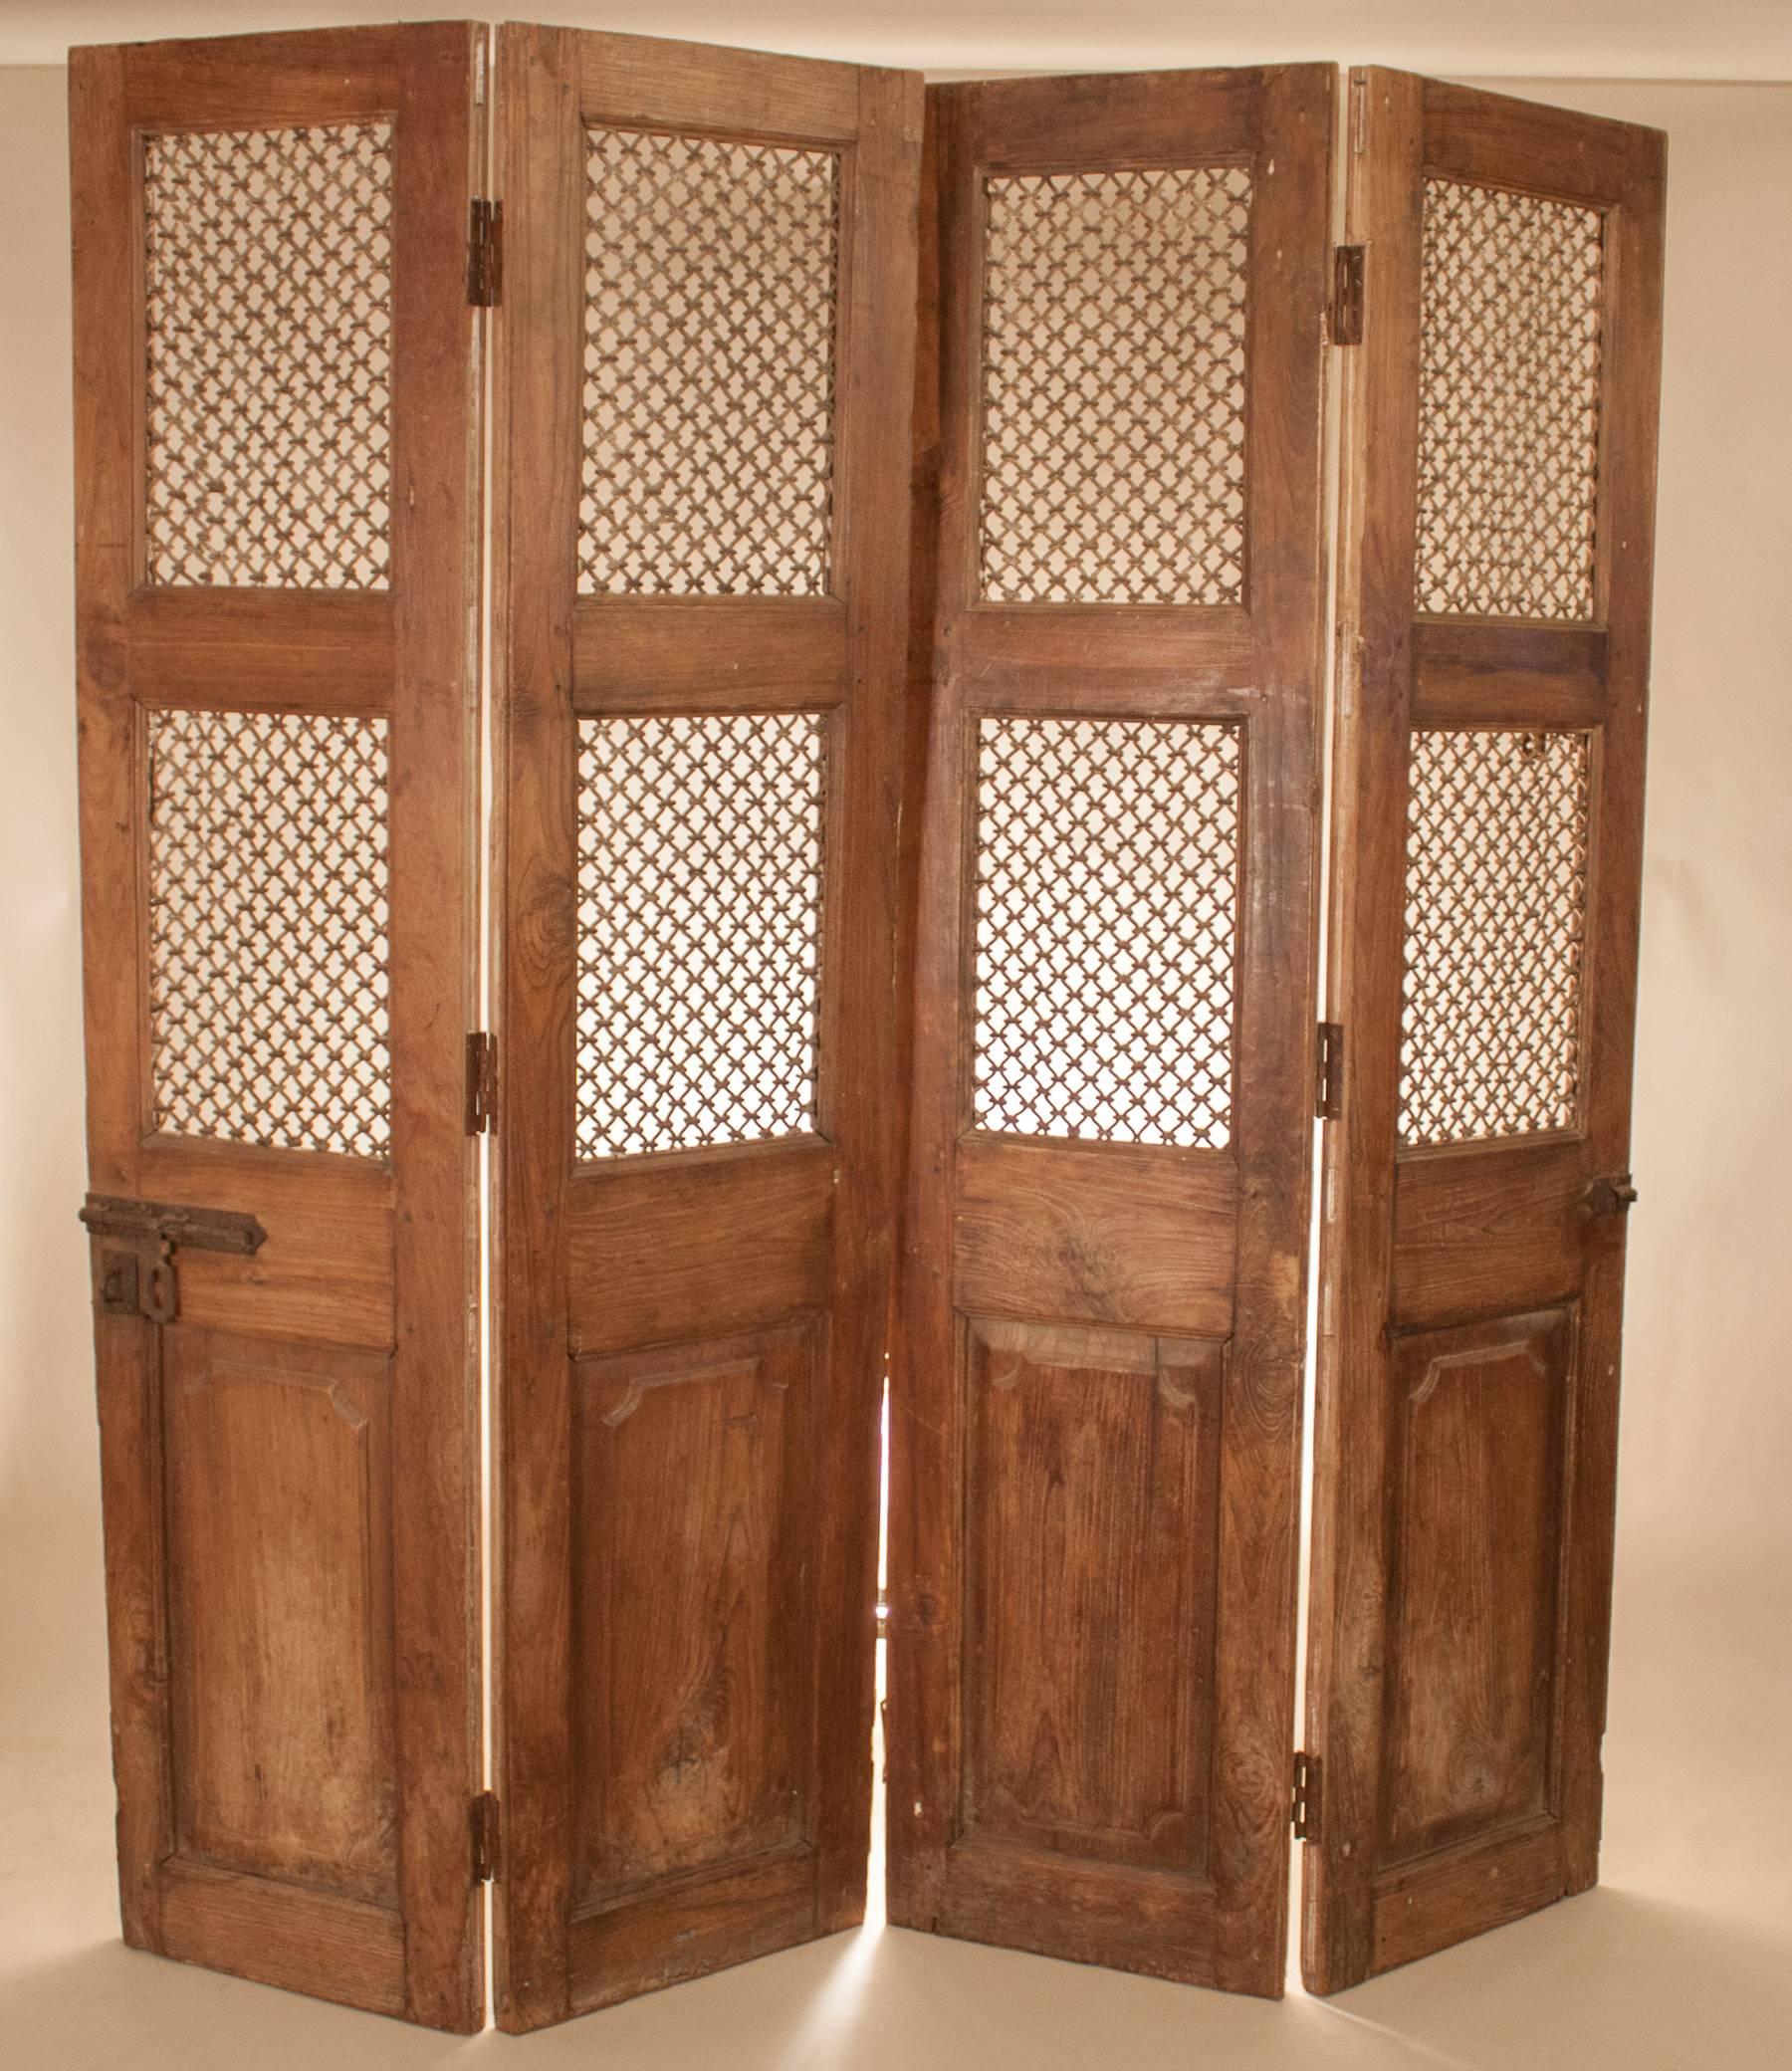 A set of teak wood doors, circa 1900, with woven iron grilles and slide locks from Gujarat, India. The set is comprised of two pairs of doors, each with two pegged joint panels hinged together, for a total of four panels. Originally used as a front